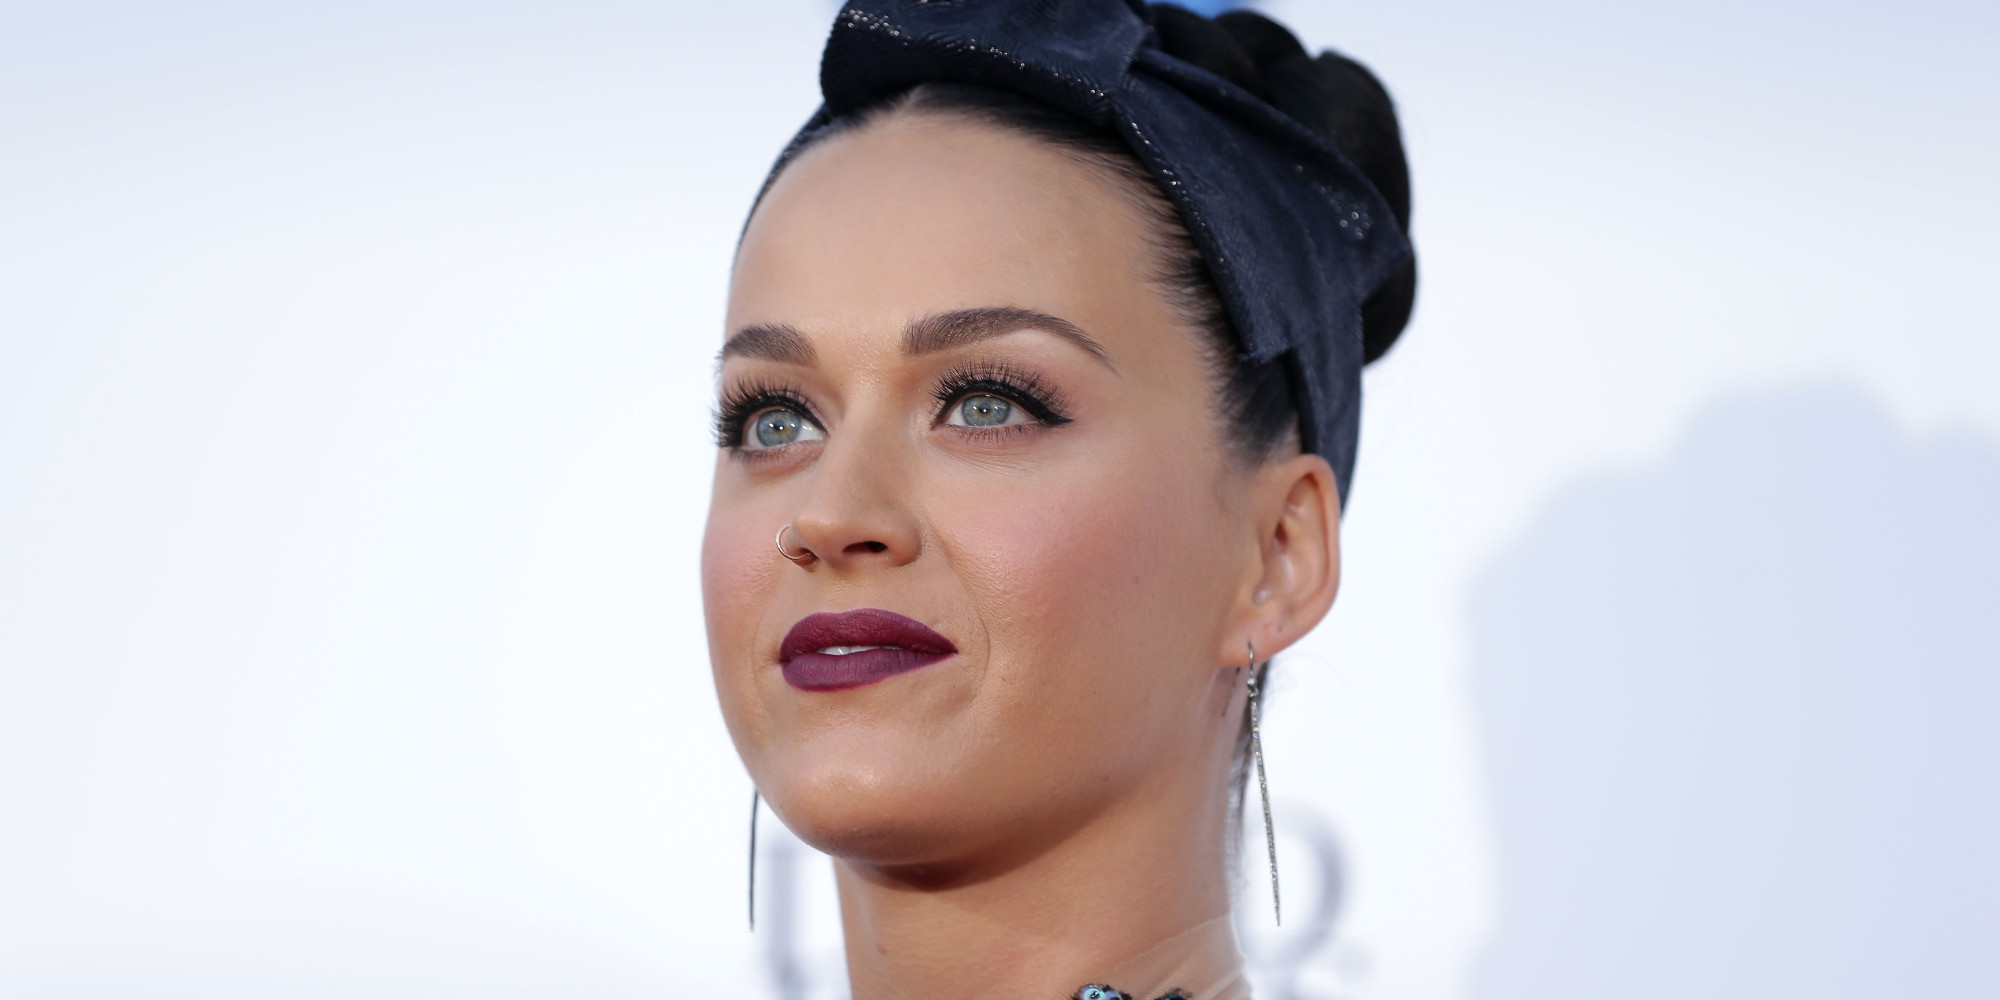 Katy Perry Rocks A Matching Crop Top And Skirt On The Red Carpet | HuffPost